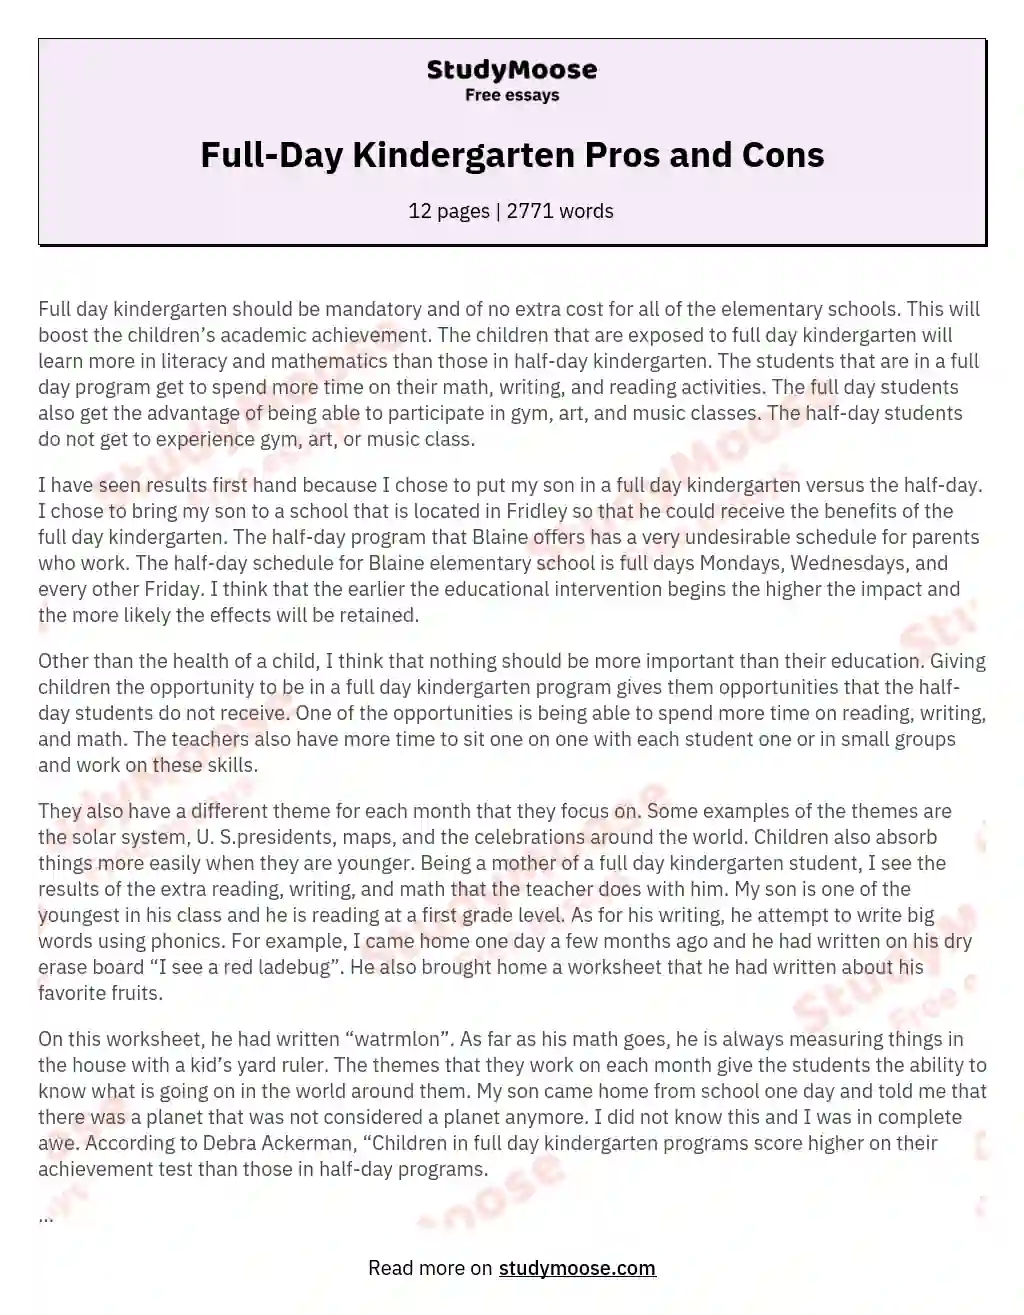 Full-Day Kindergarten Pros and Cons essay